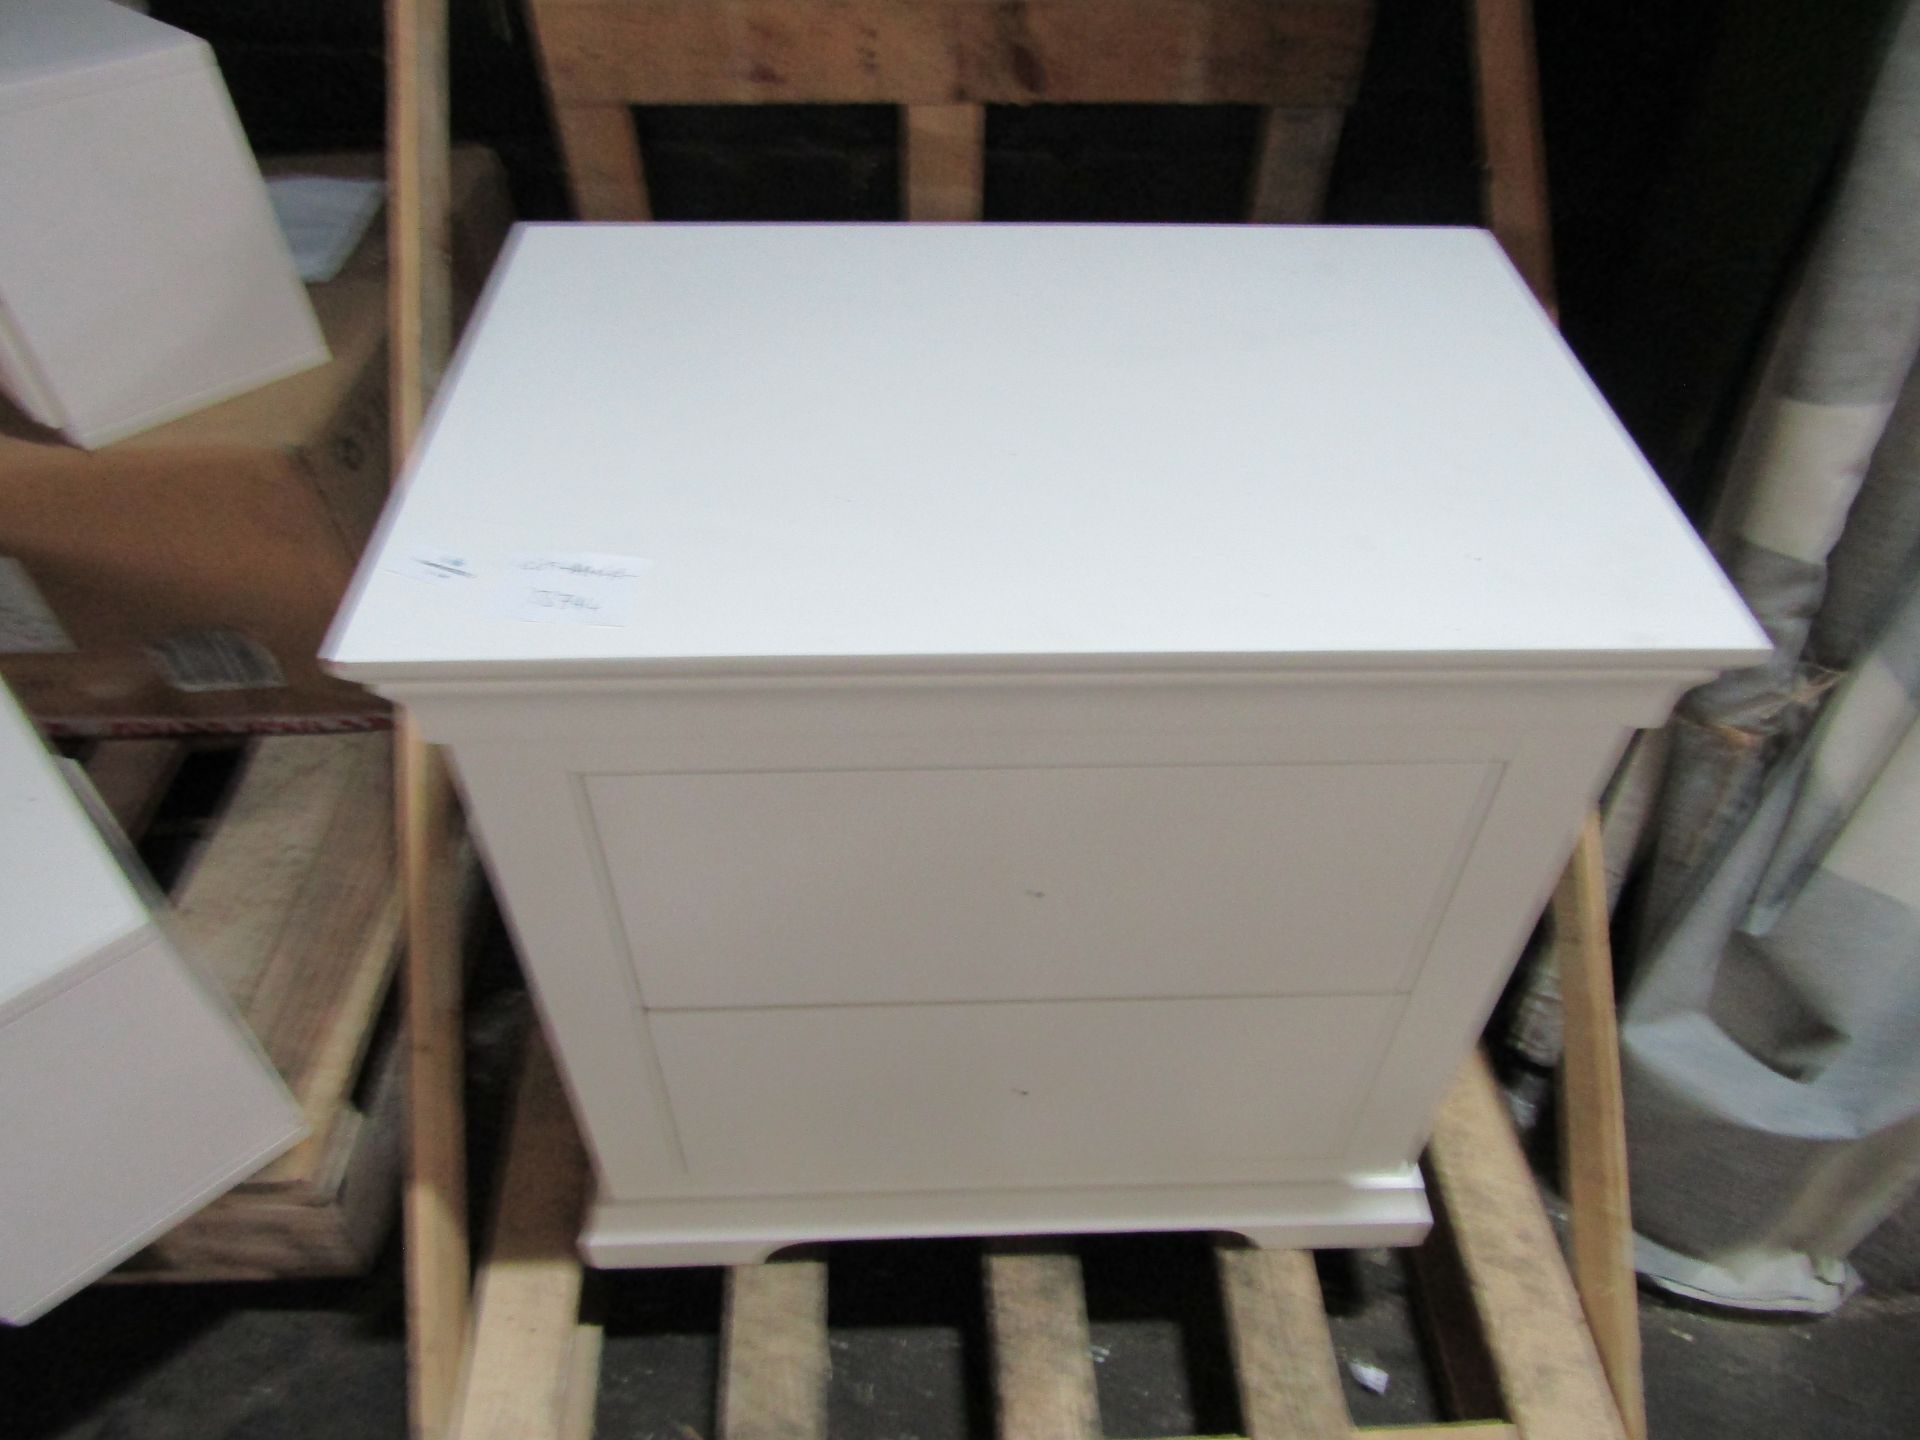 Cotswold Company Chantilly Warm White Large 2 Drawer Bedside RRP Â£229.00 SKU COT-APM-1041.099 PID